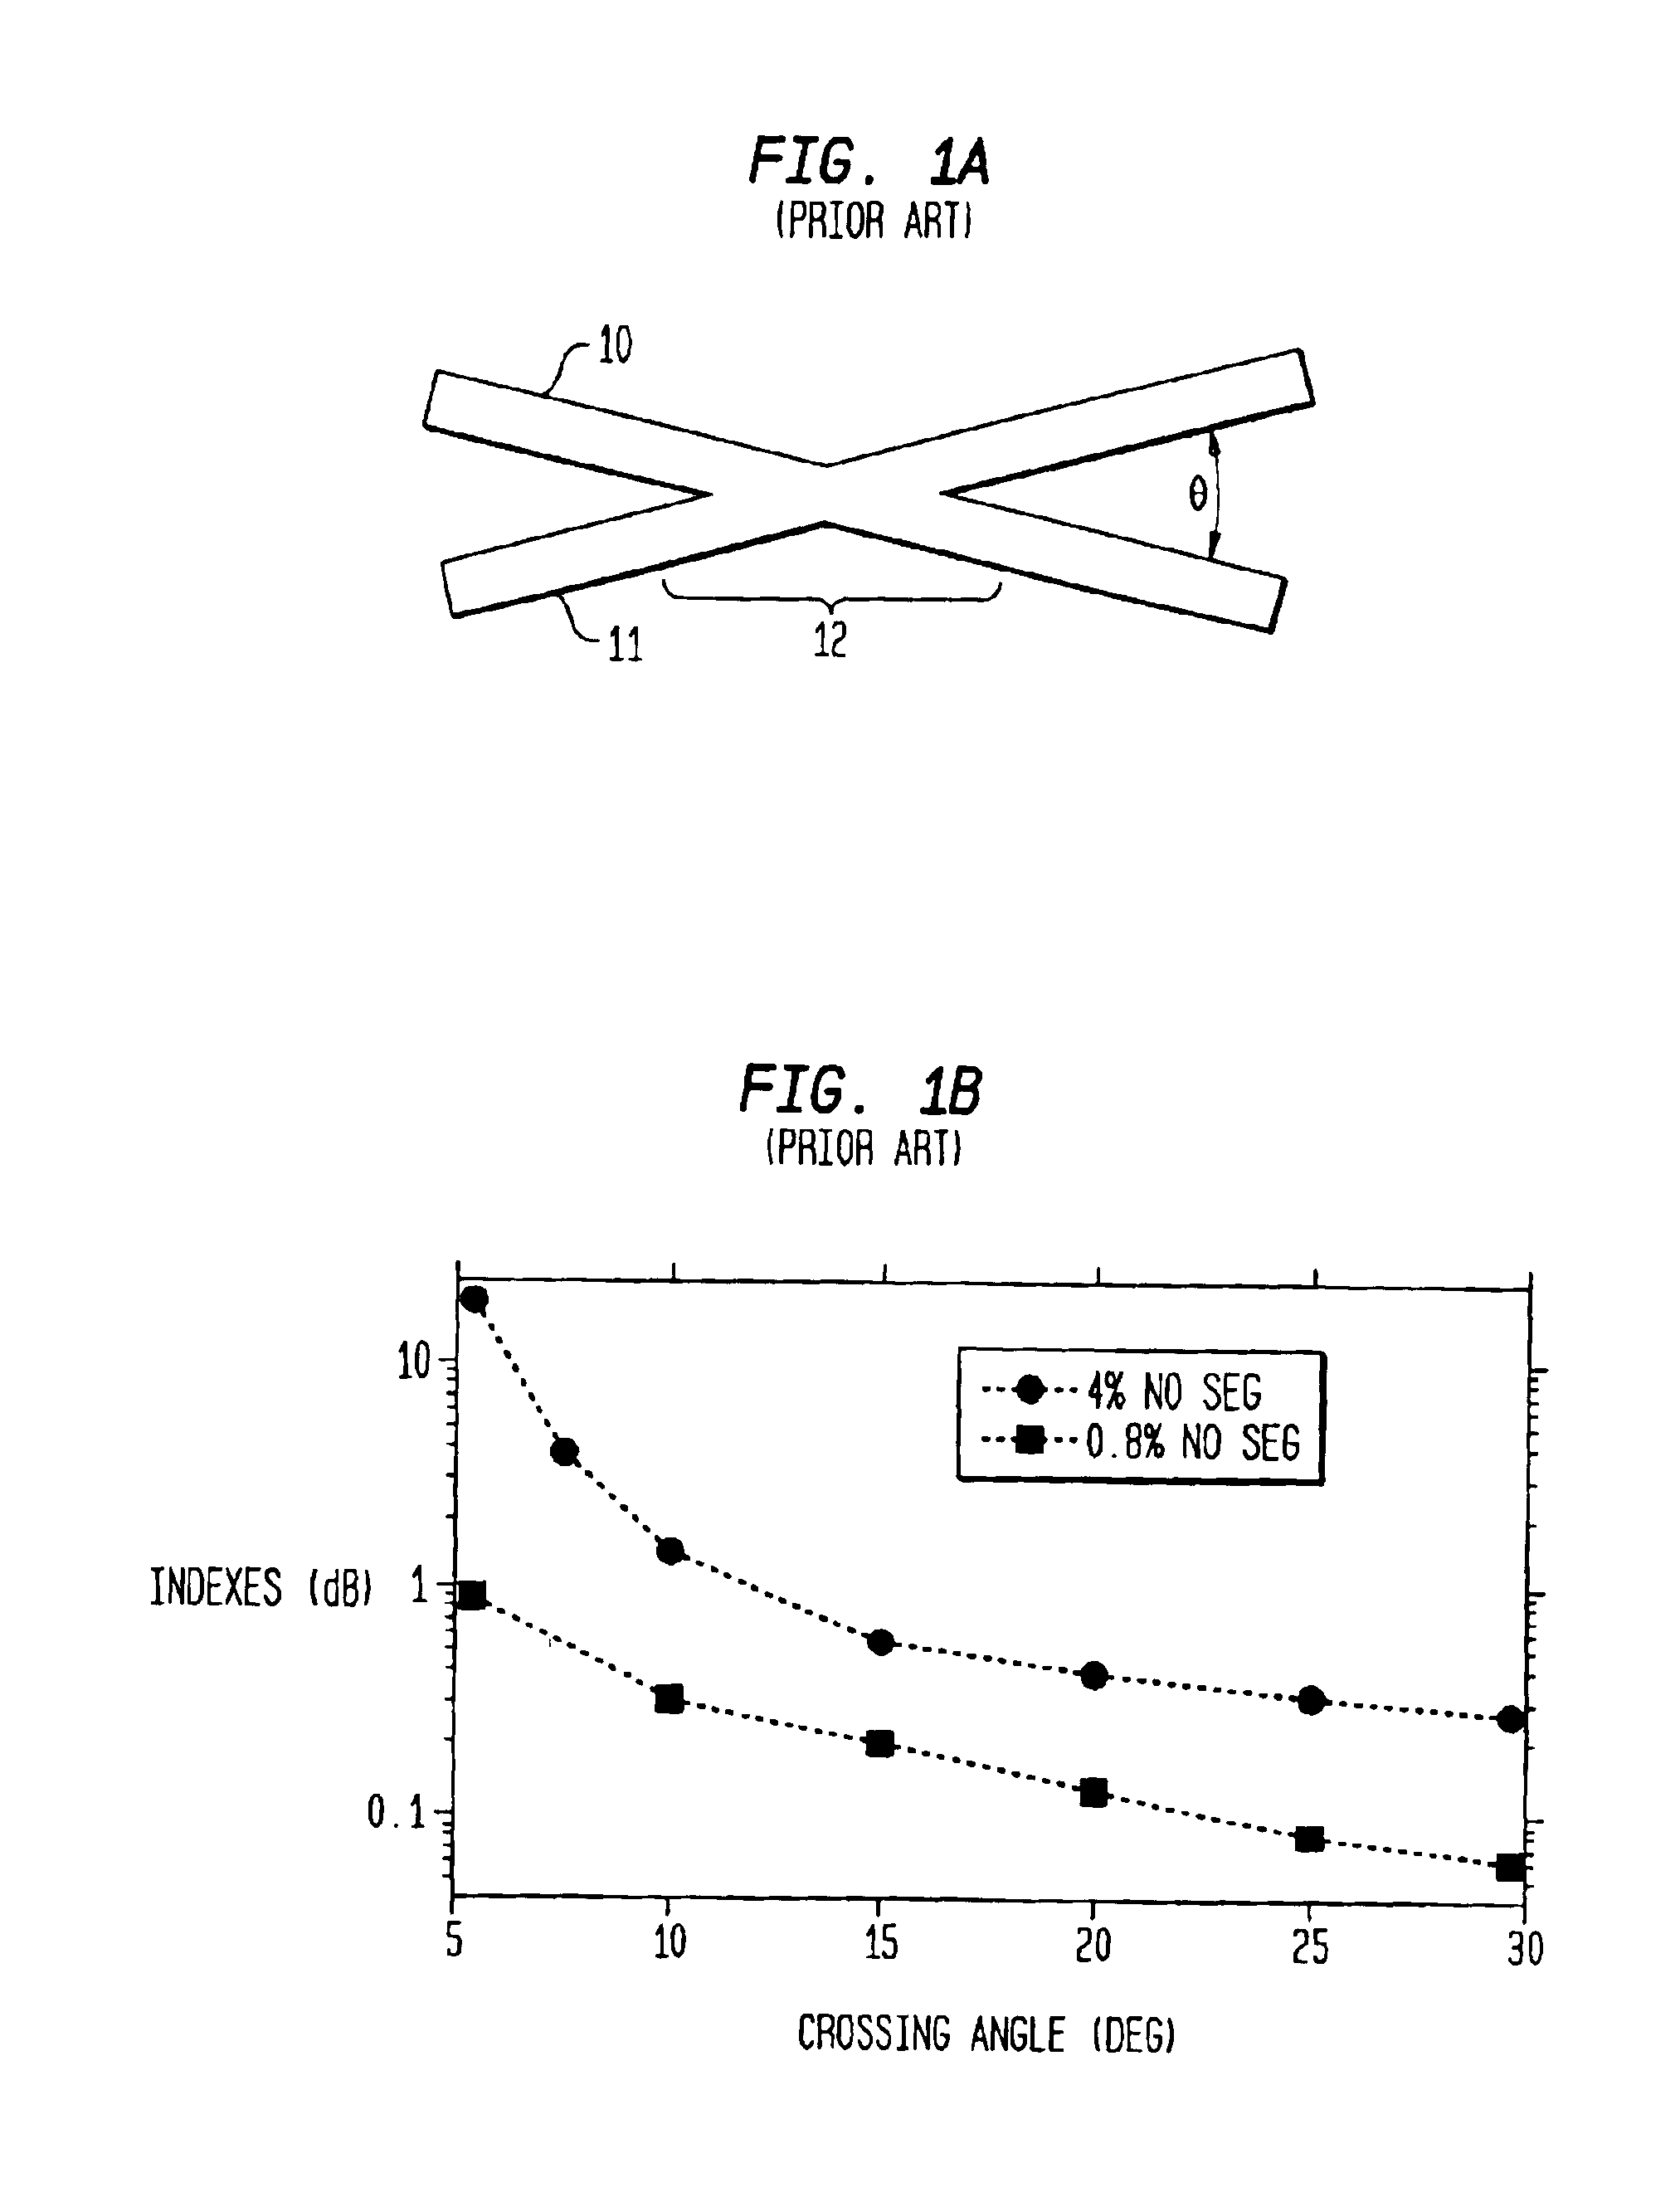 Optical waveguiding apparatus having reduced crossover losses